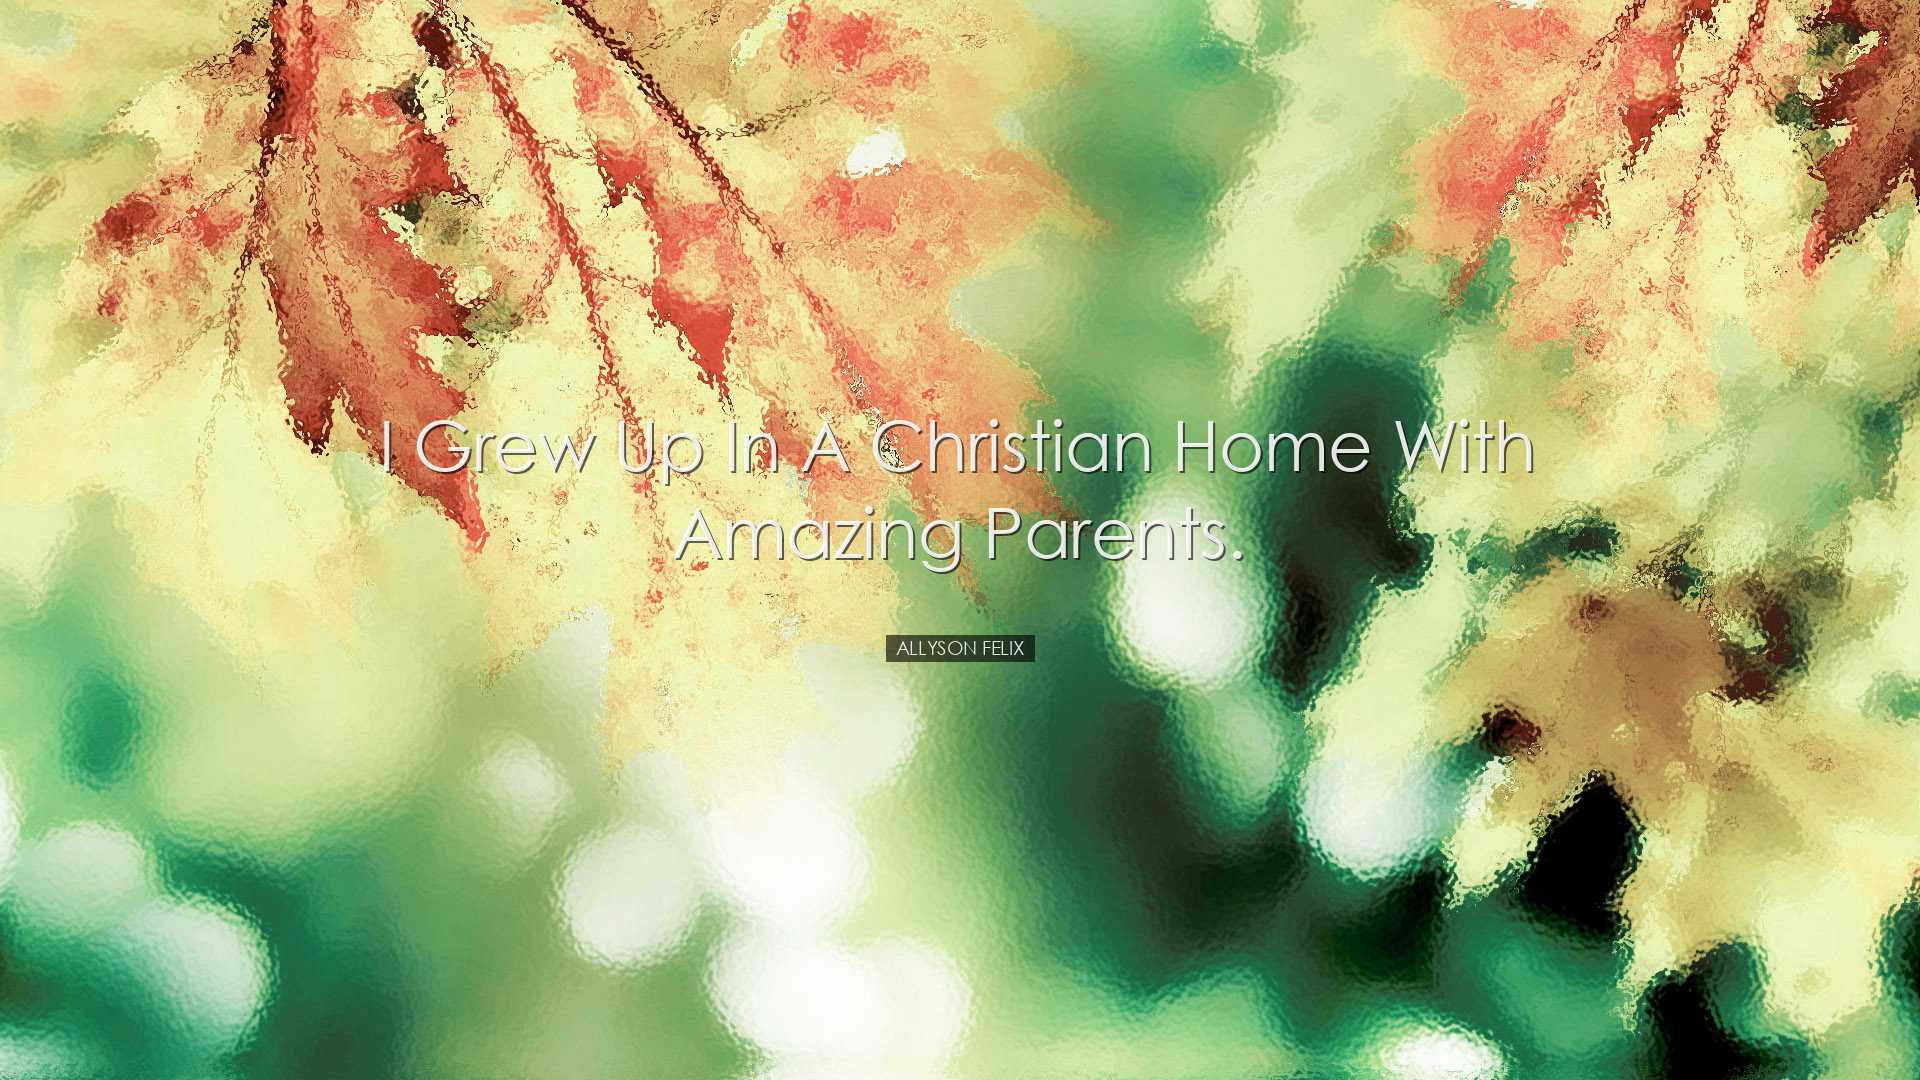 I grew up in a Christian home with amazing parents. - Allyson Feli